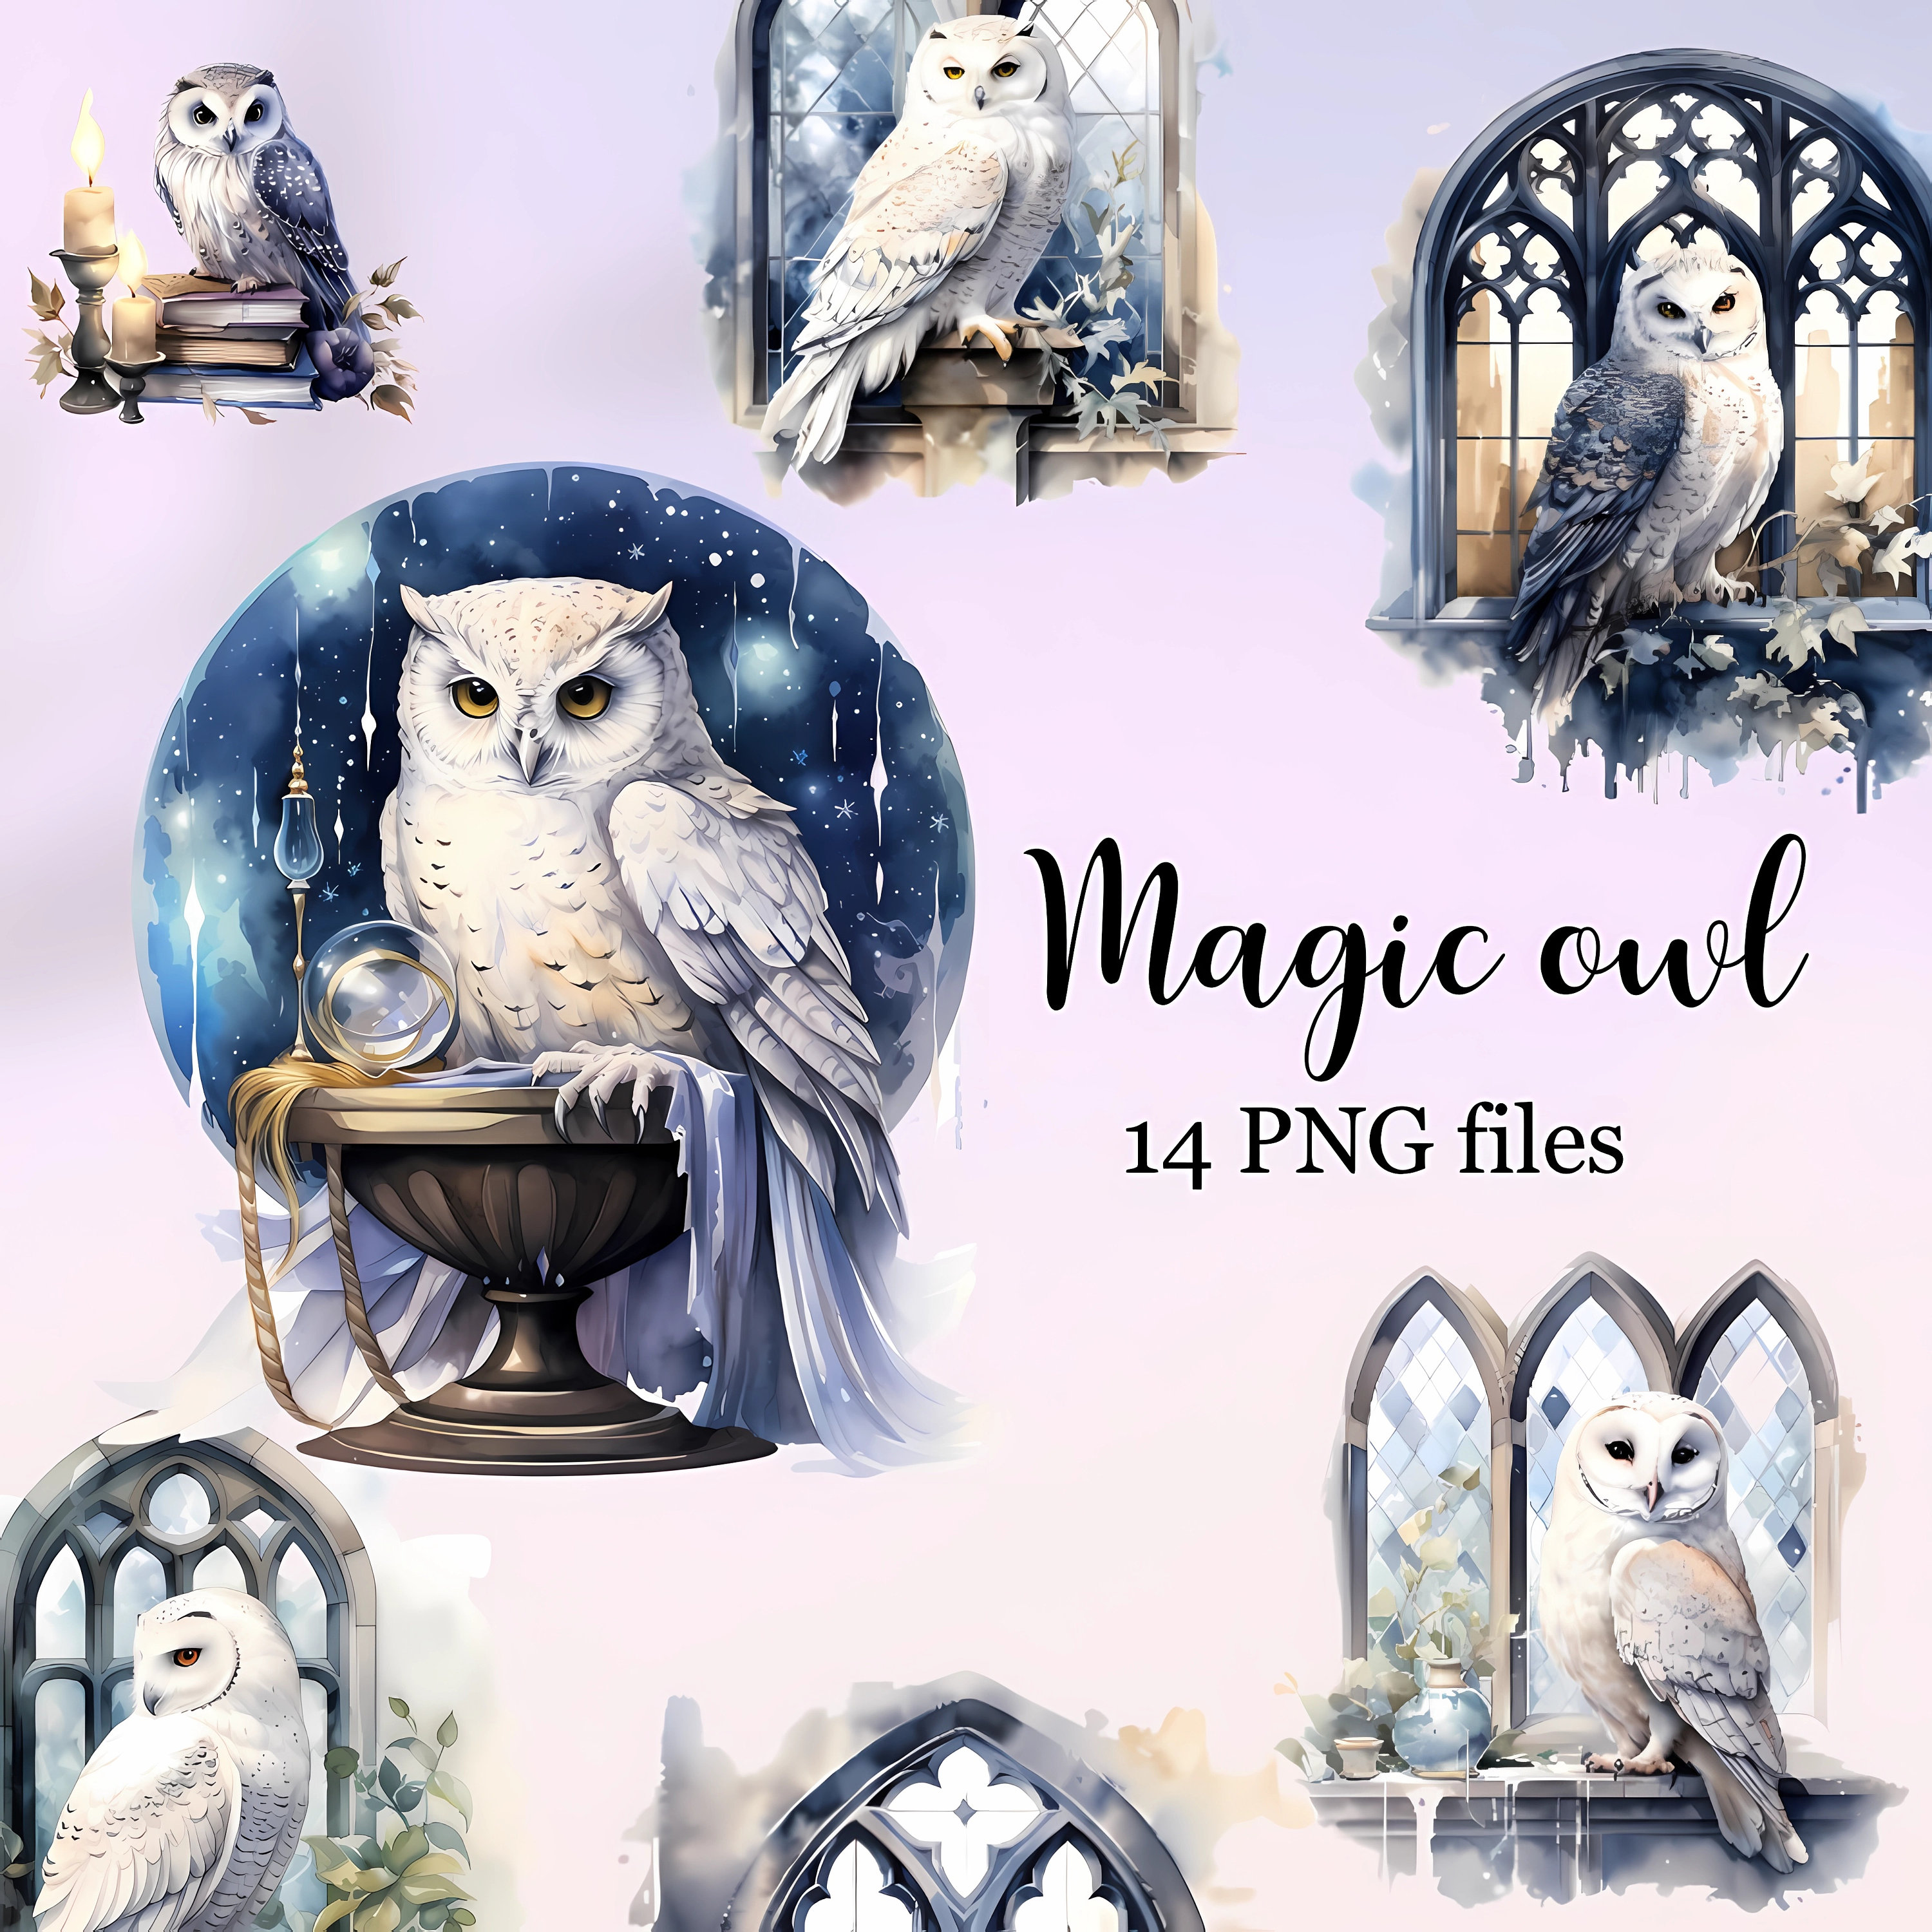 Magic Owl clipart, Owl images, Owl illustration, Wizard Owl, Clipart bundle of 14 PNG files, Wizard 